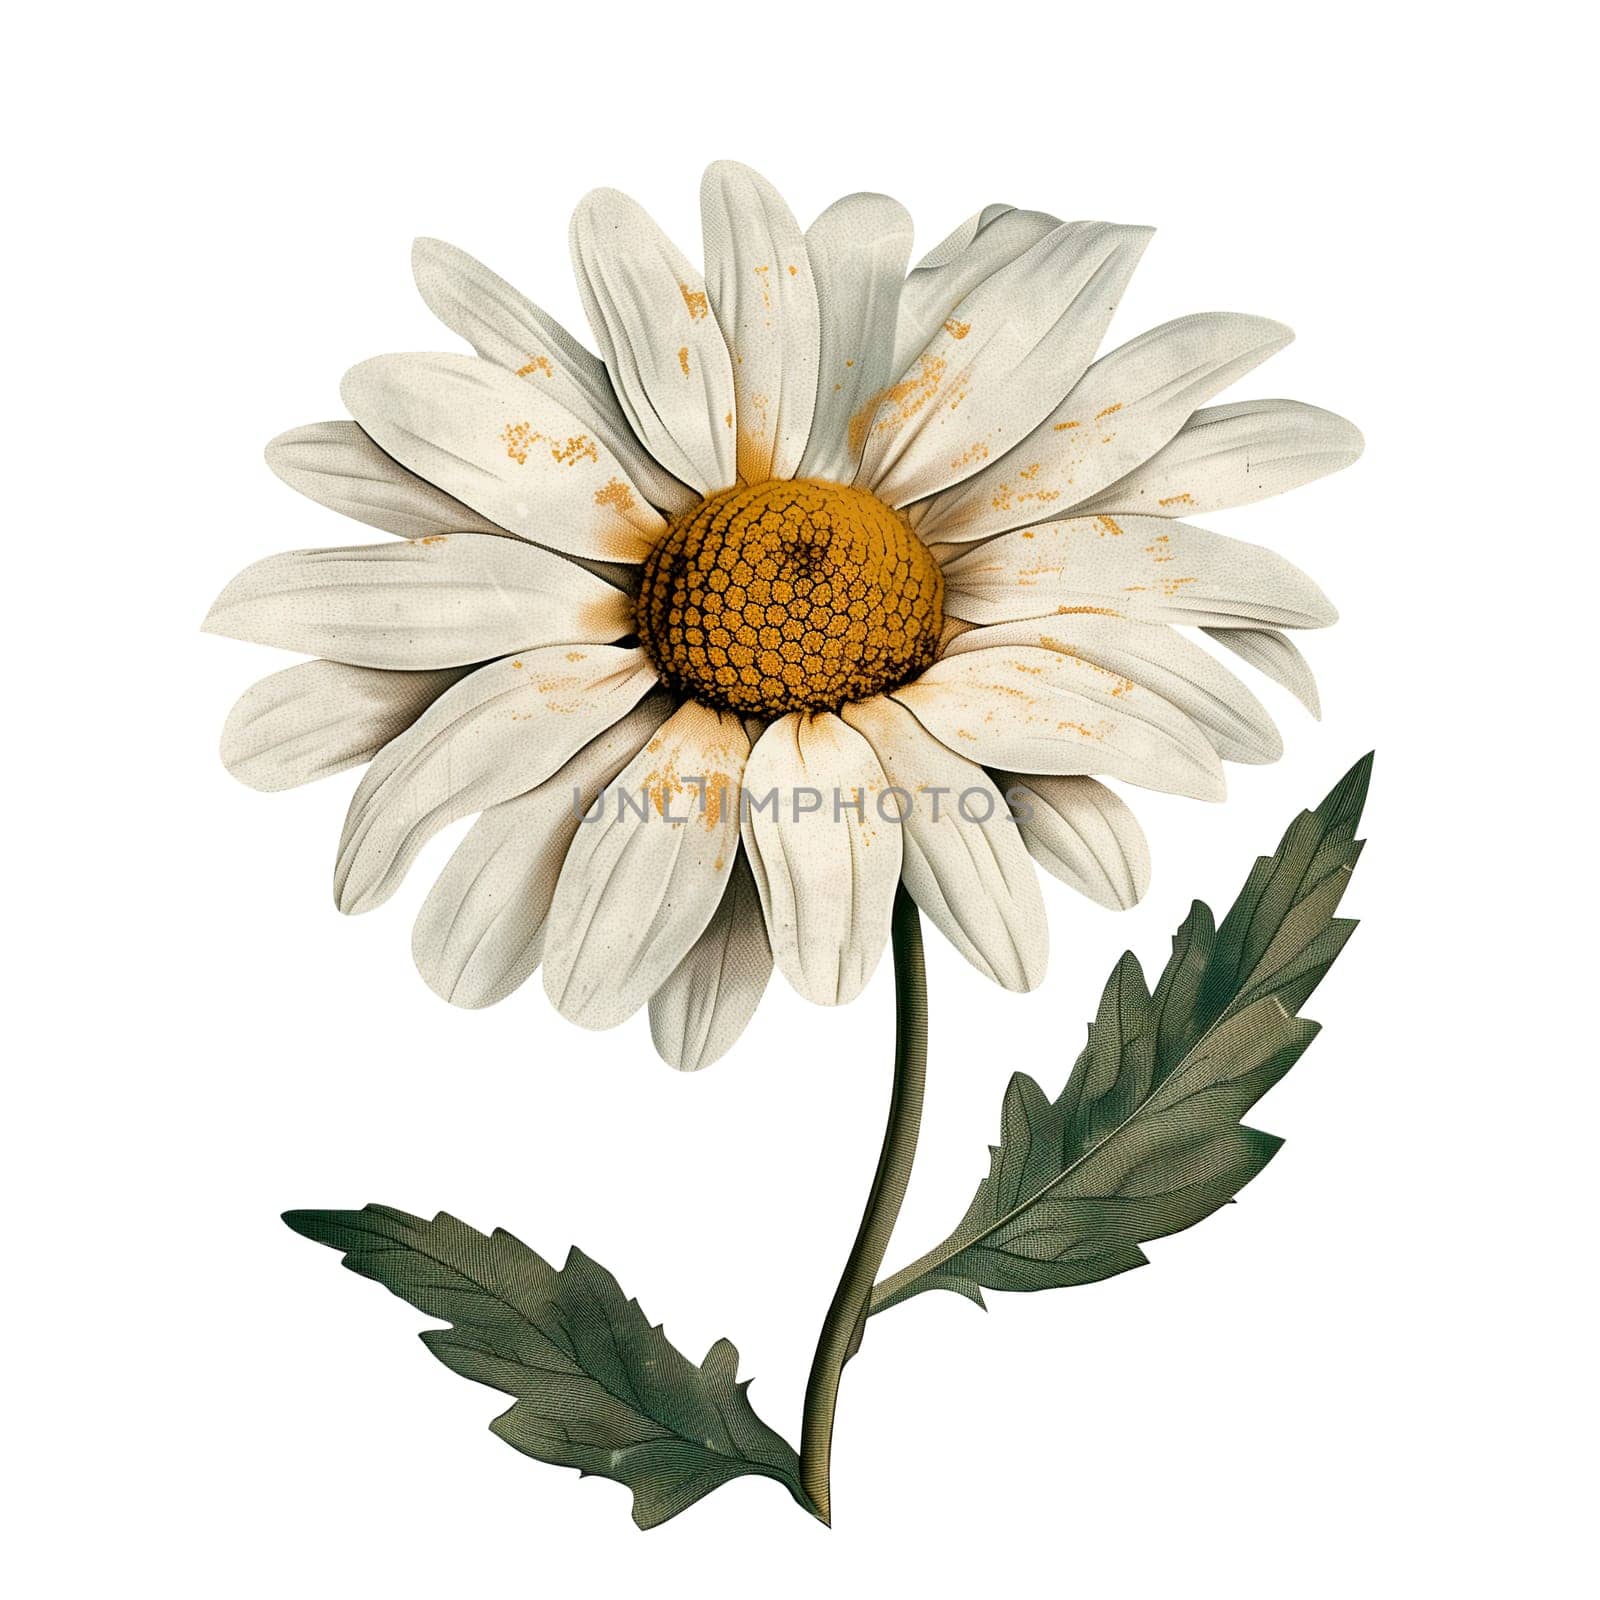 Isolated illustration of daisy floral element by Dustick